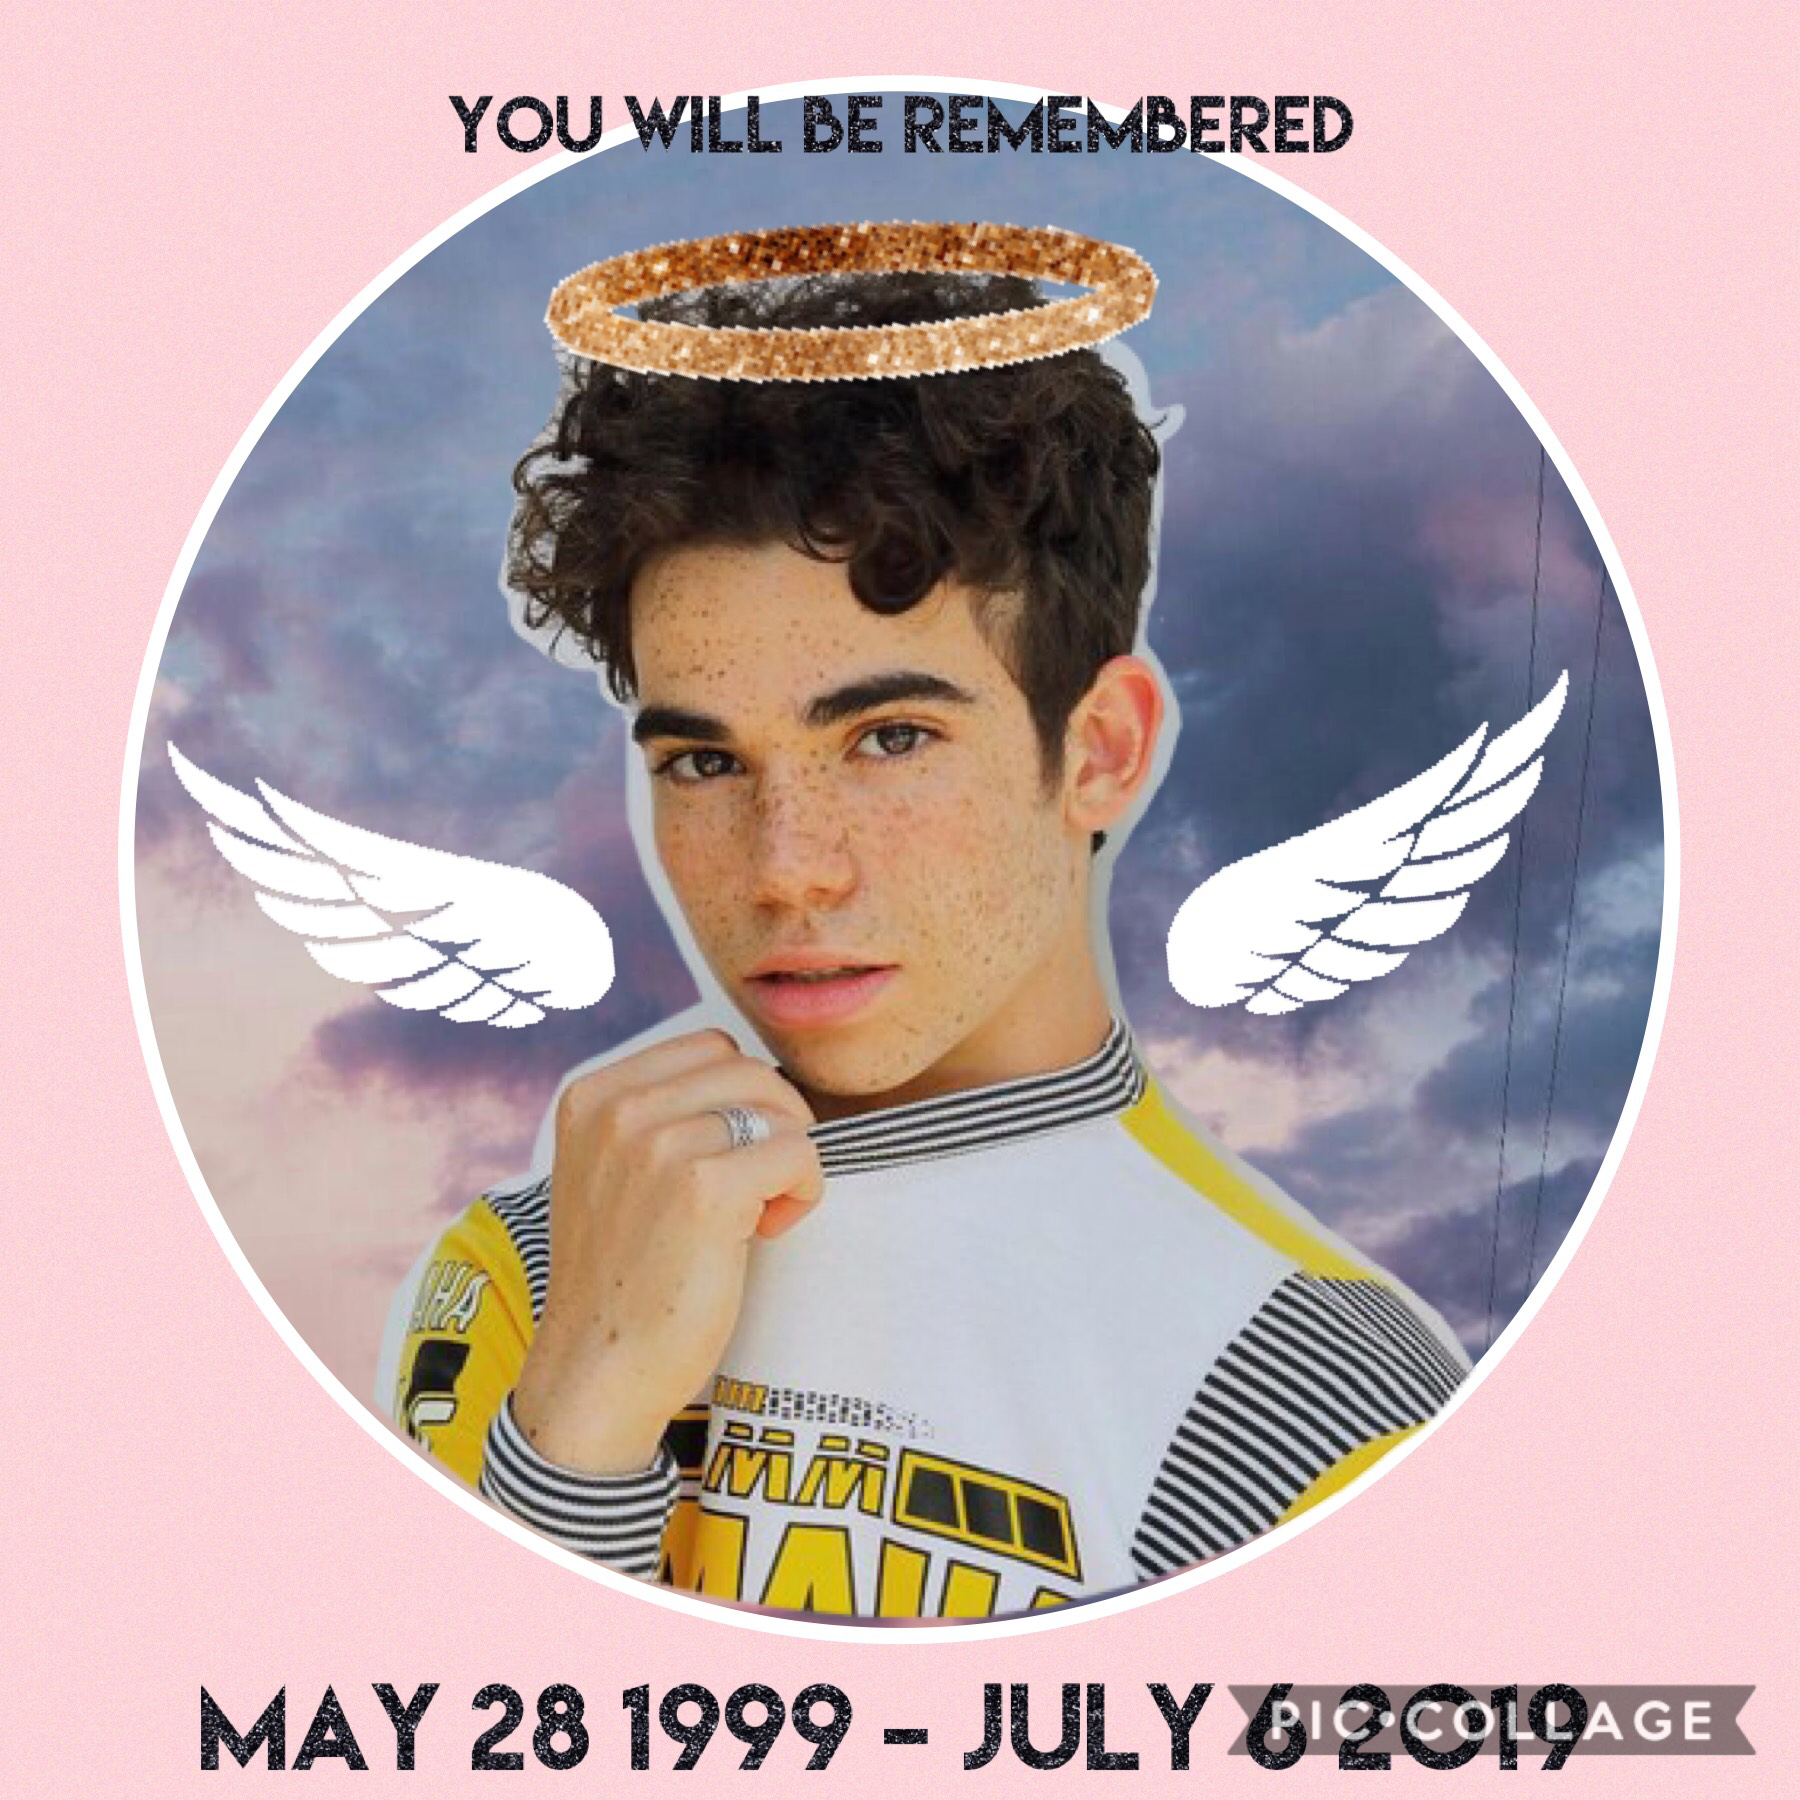 r i p Cameron Boyce.

We lost a bright soul, and heaven gained one.